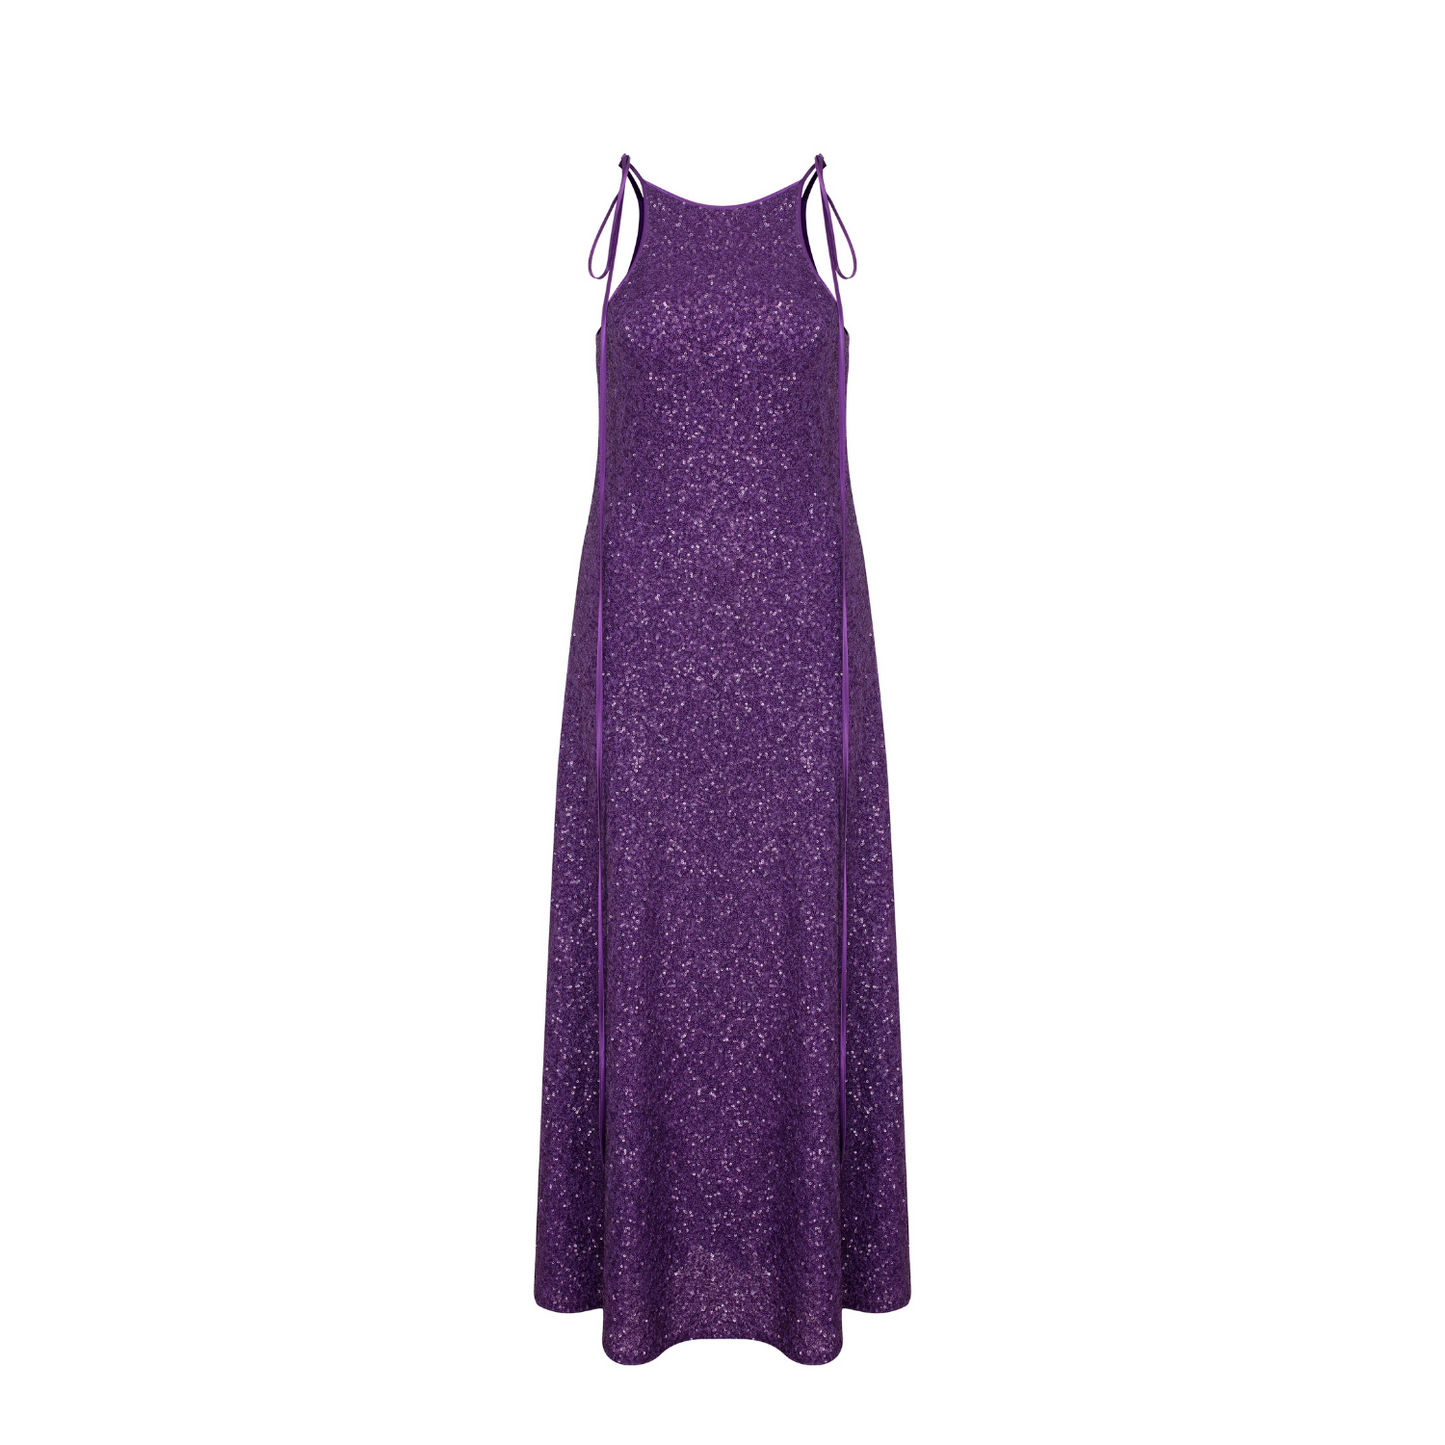 Addie Sequin Long Dress in Sparkling Grape